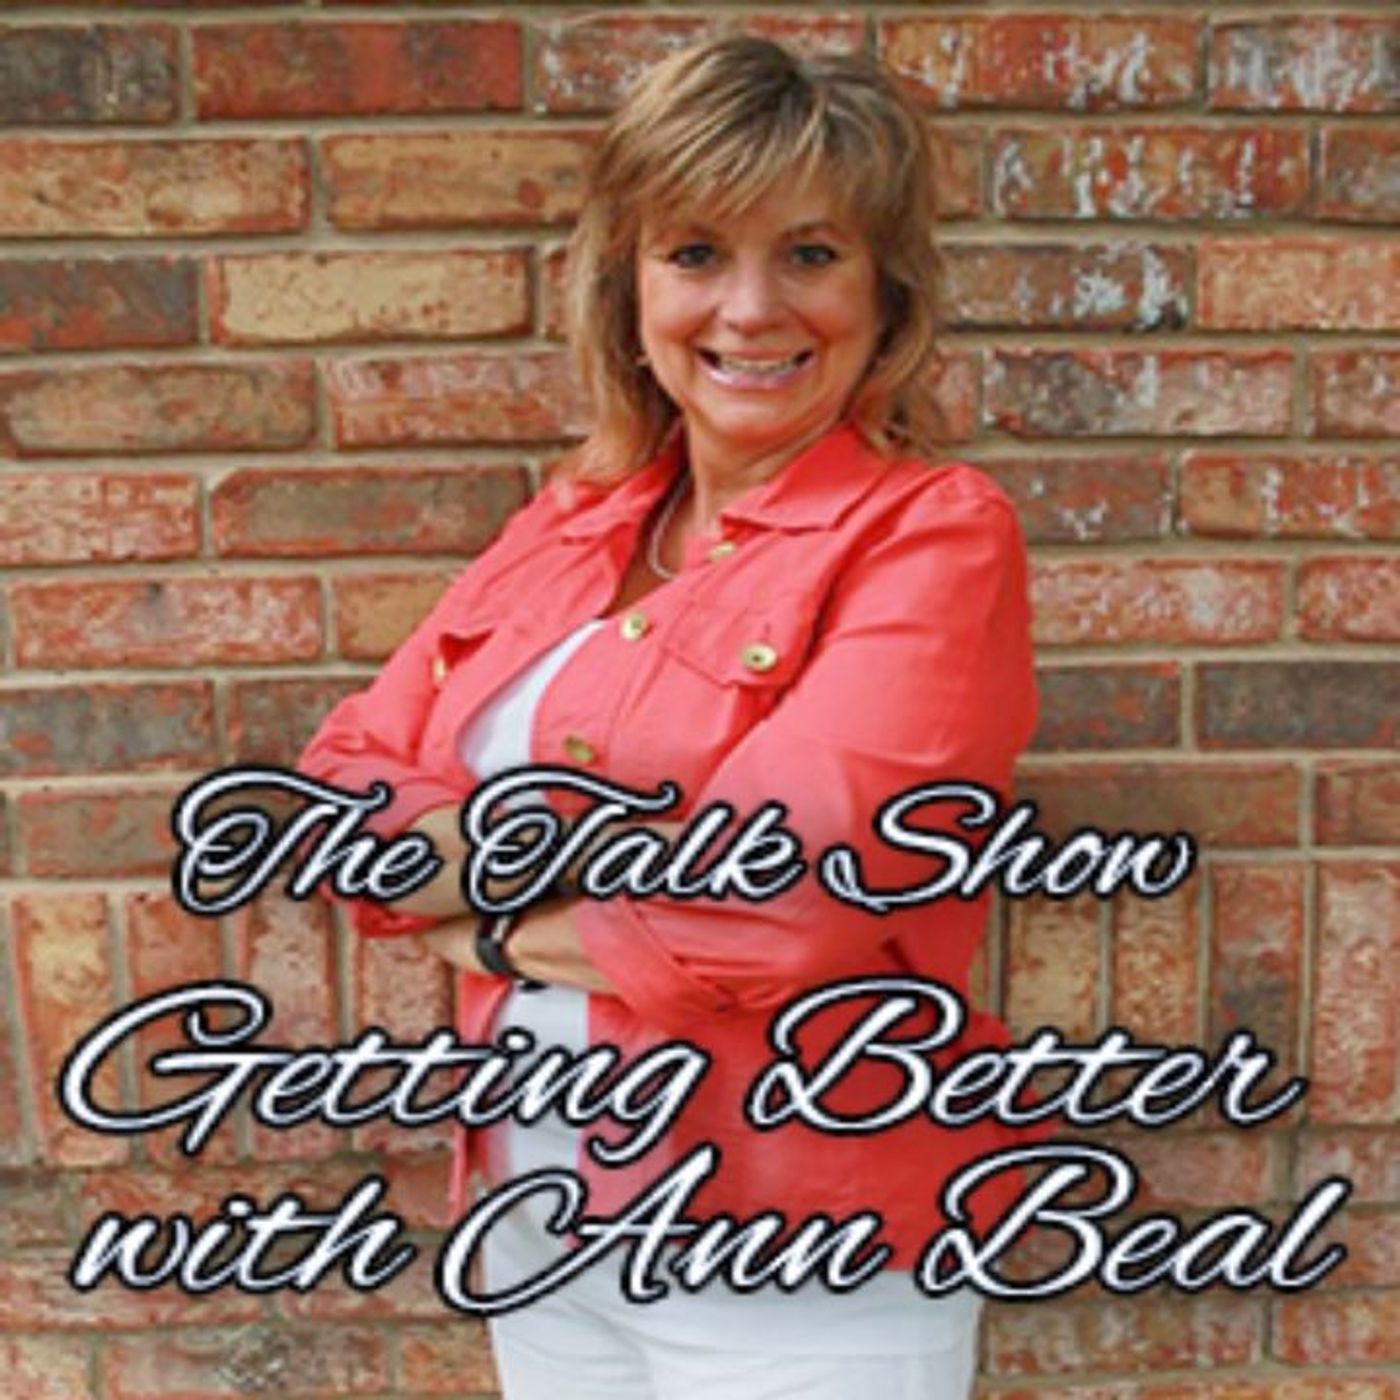 Getting Better with Ann Beal podcast